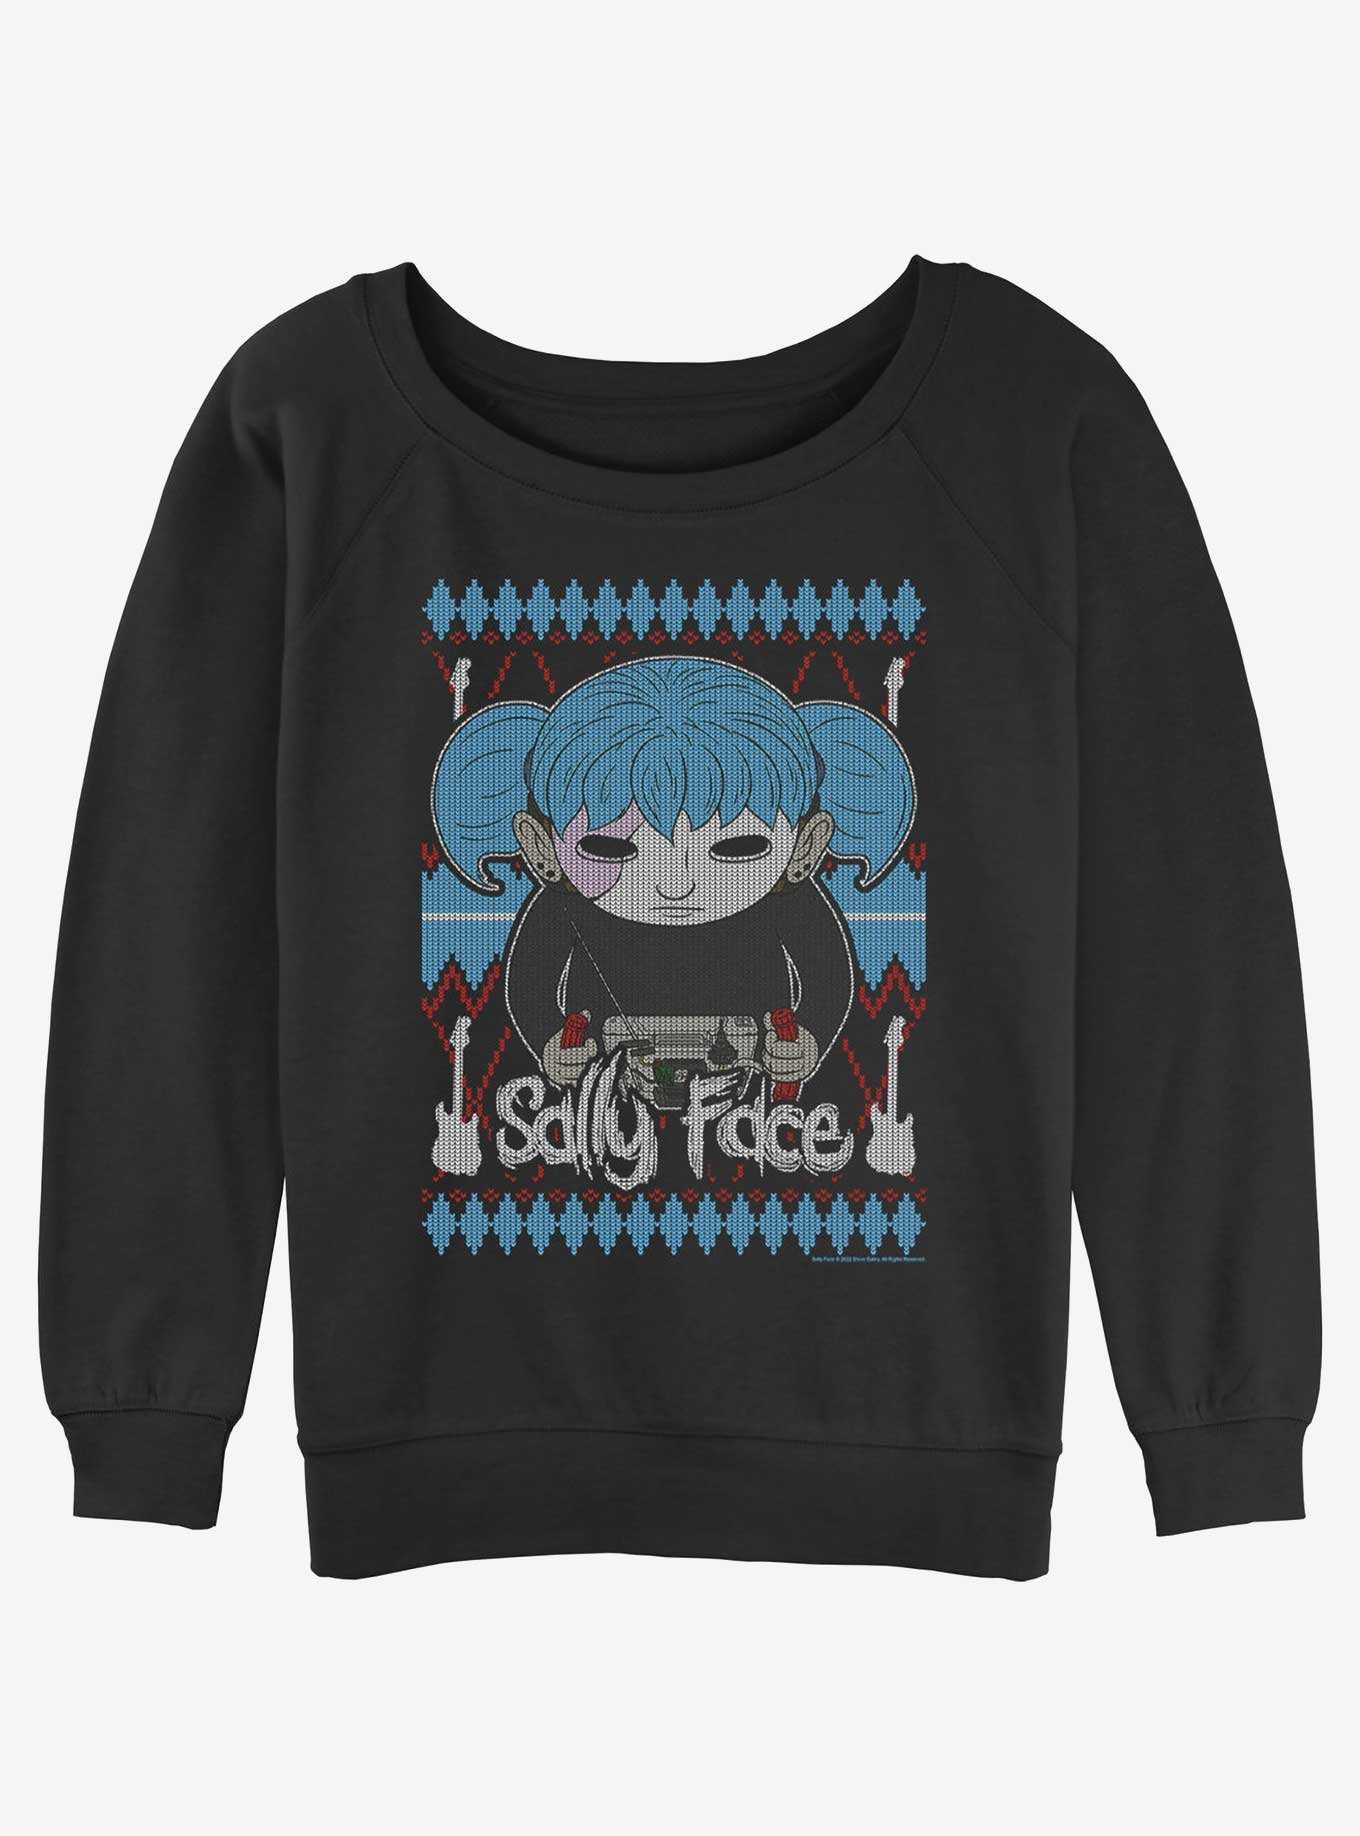 Sally Face Ugly Sweater Womens Slouchy Sweatshirt, , hi-res